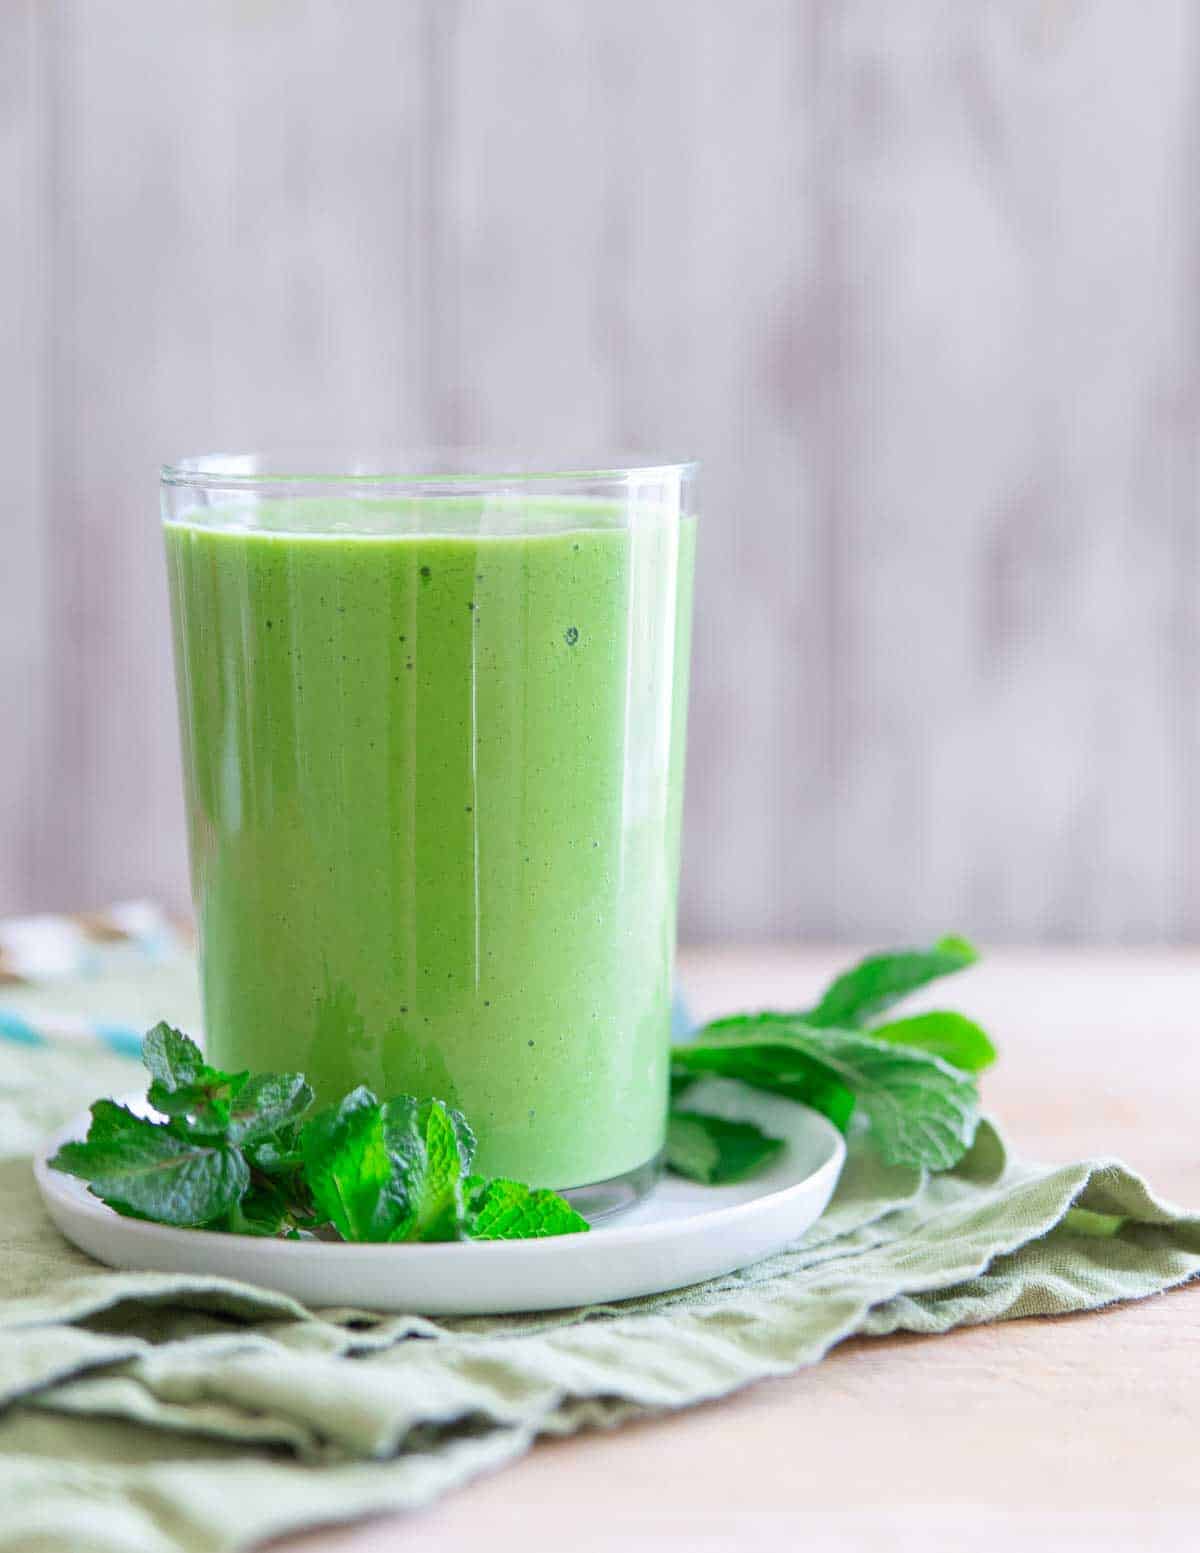 This healthier version of the famous McDonald's shamrock shake is a delicious, low-calorie option this season.